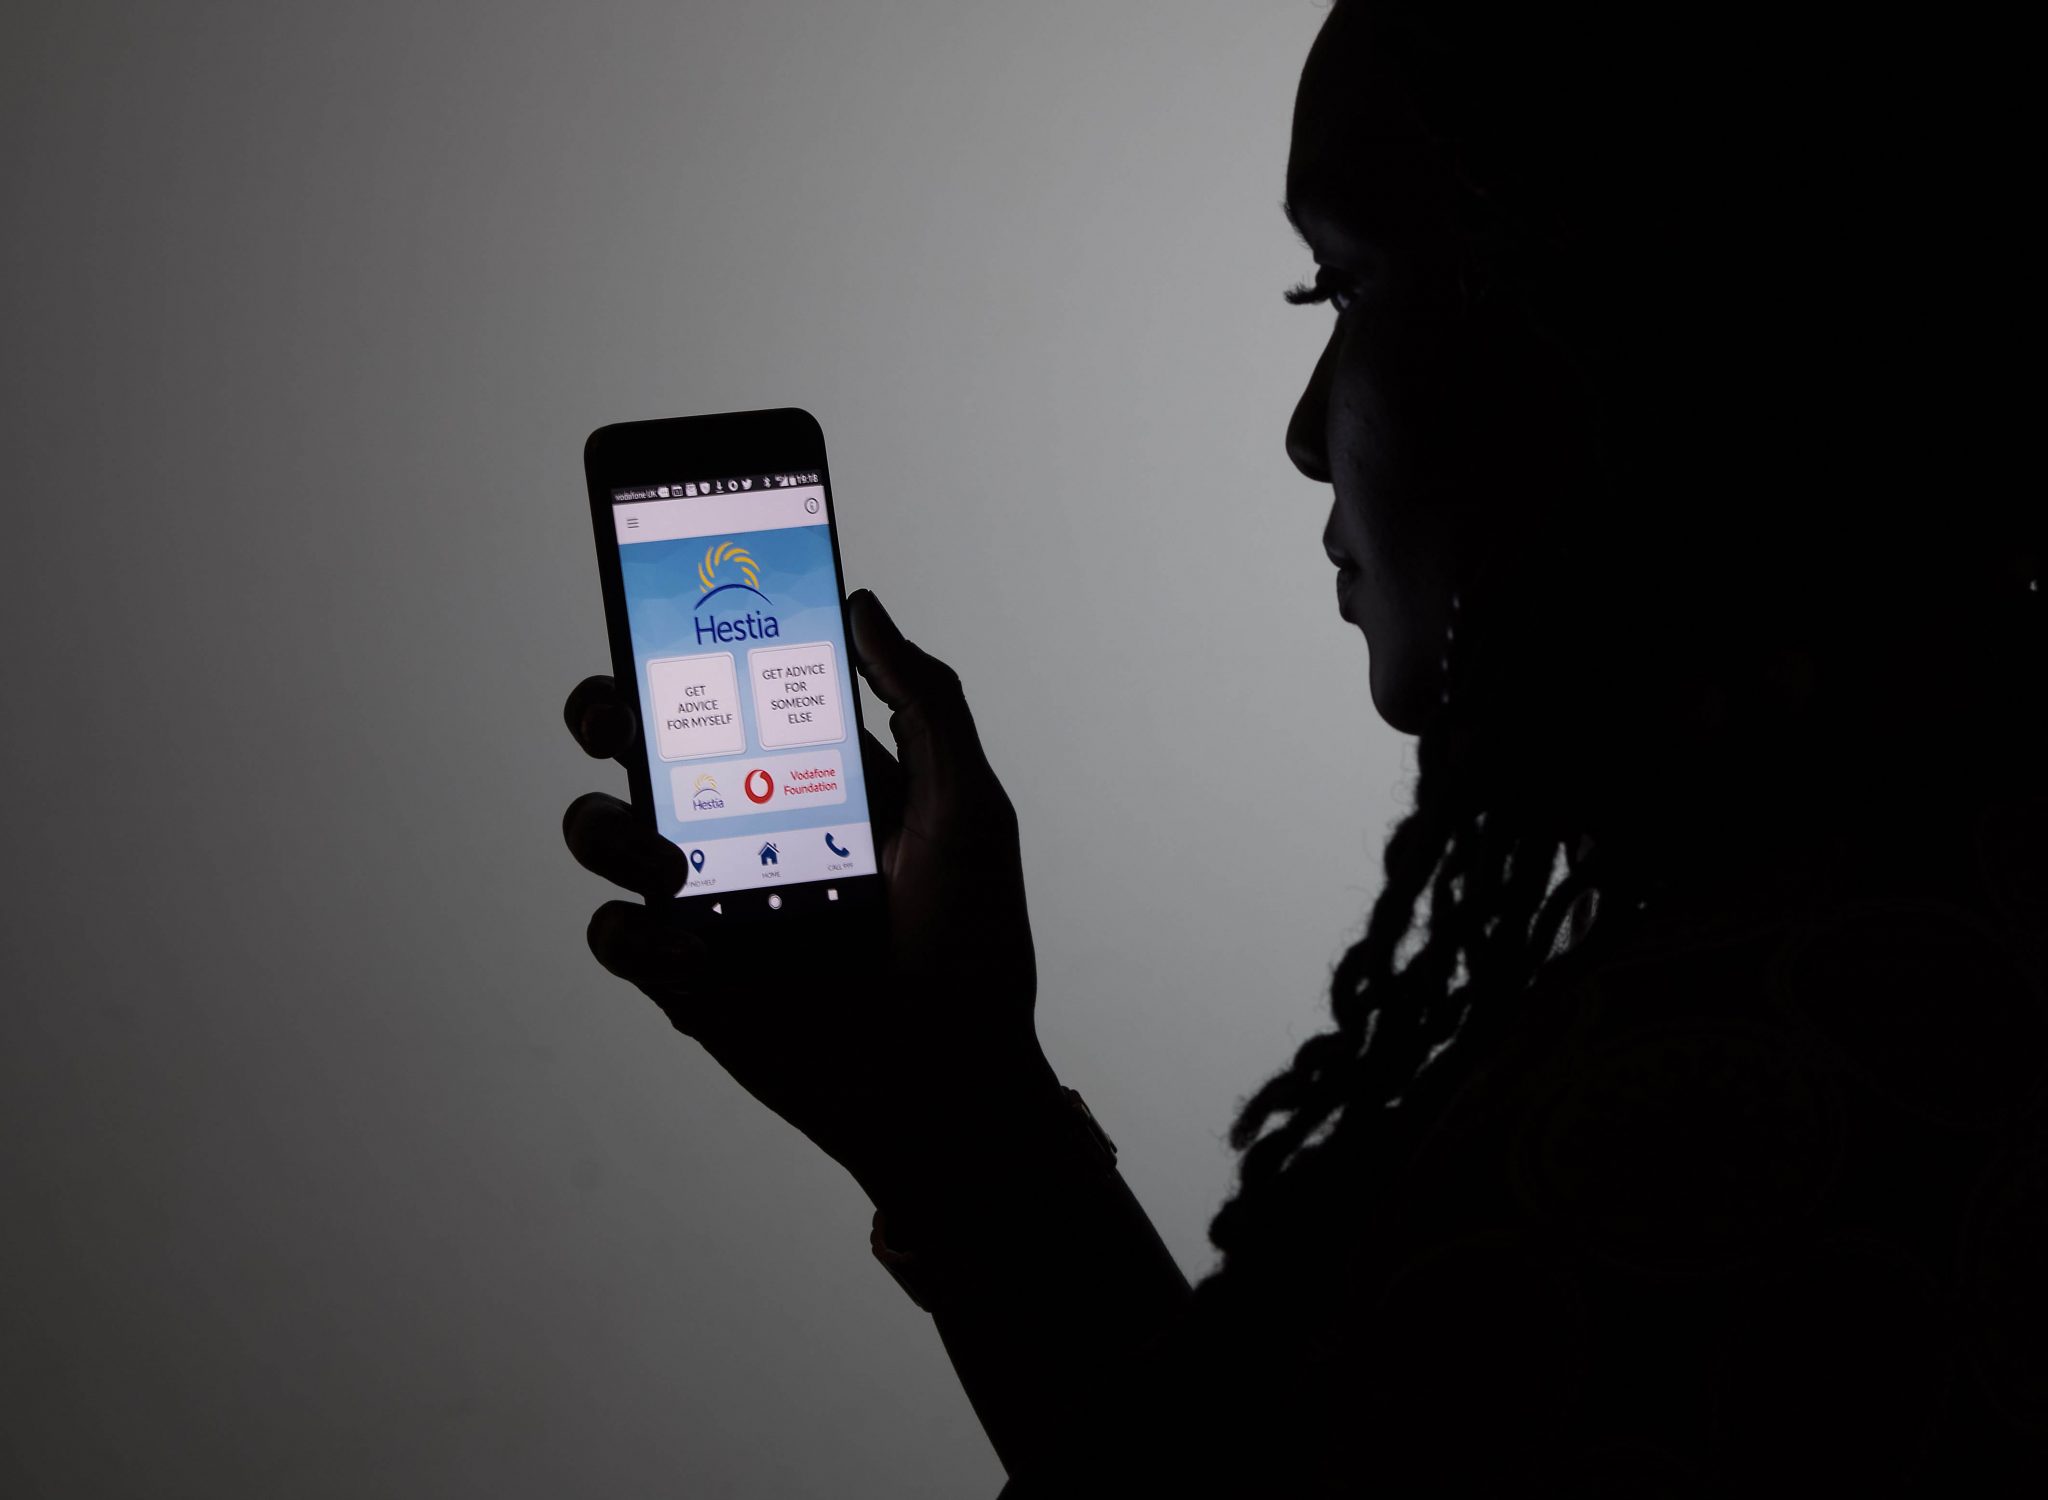 A woman holds up a smartphone showing the welcome screen for Bright Sky, an app created by the Vodafone Foundation in partnership with Hestia